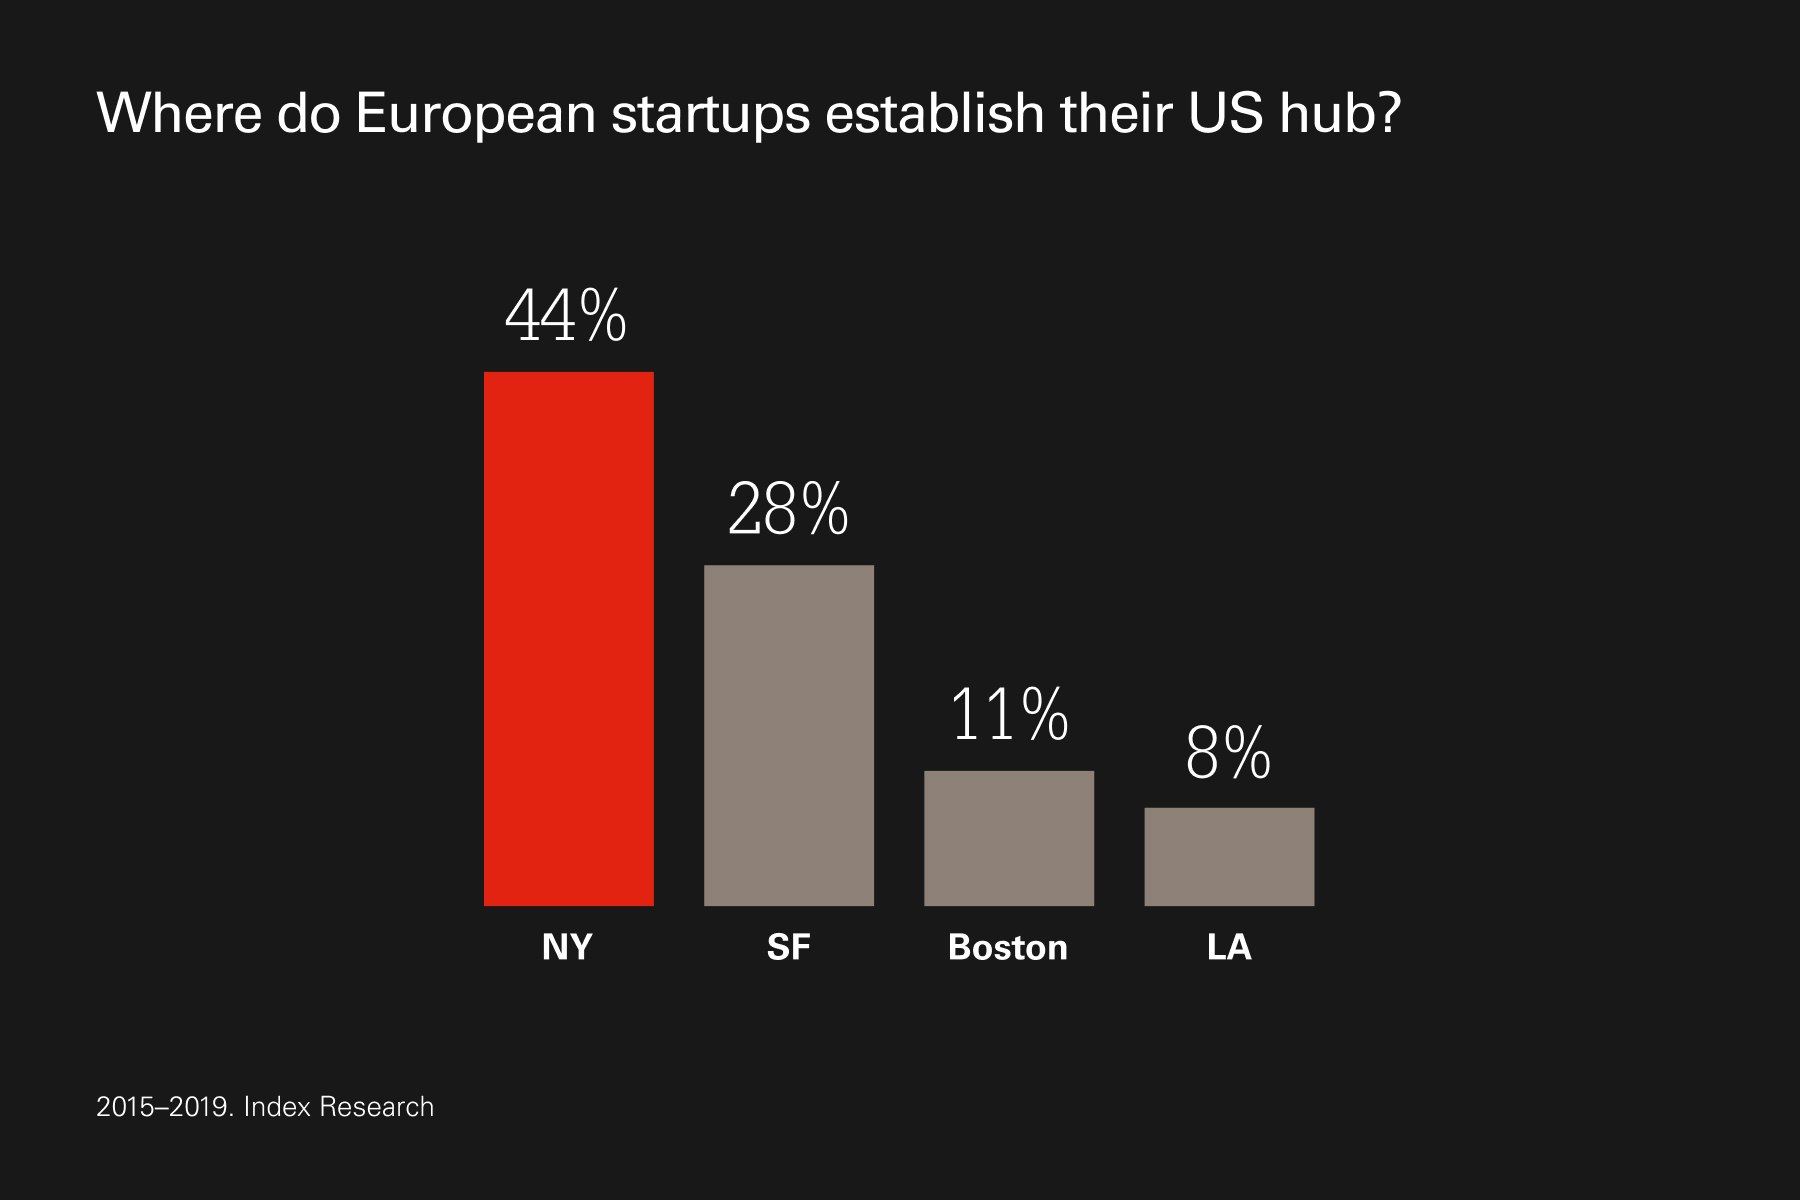 44% of startups choose New York for their US base.